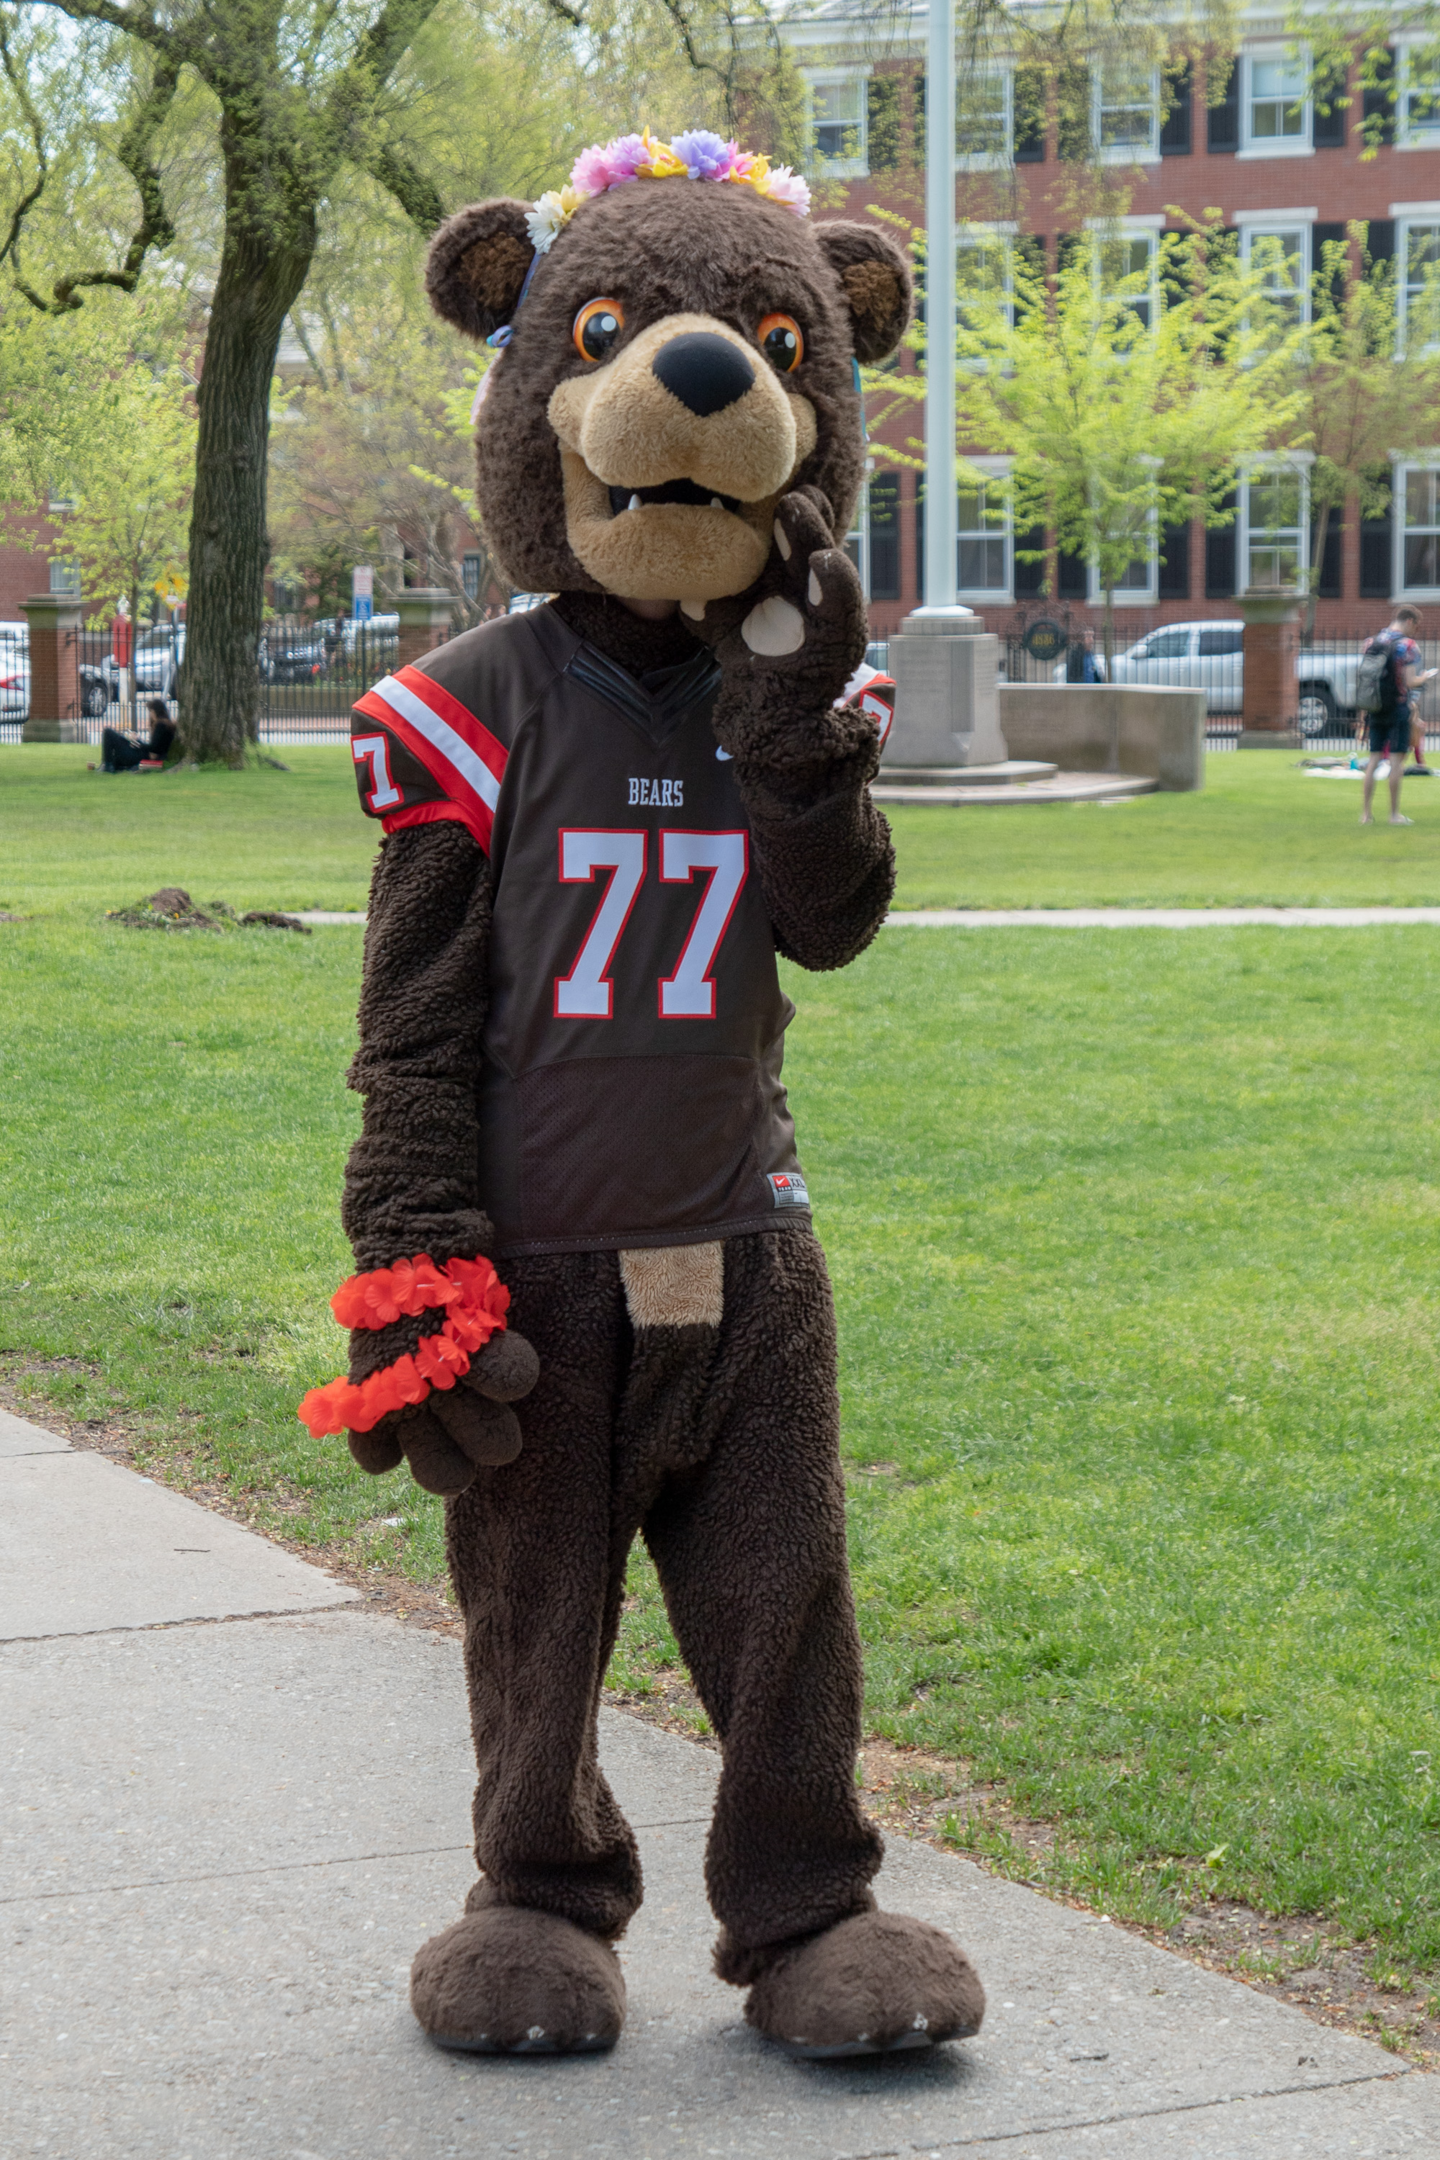 How Hard Is It To Get Into Brown? This is Brown mascot a bear. It showcases that accepted students on the brown campus will find active engagement when attending brown.